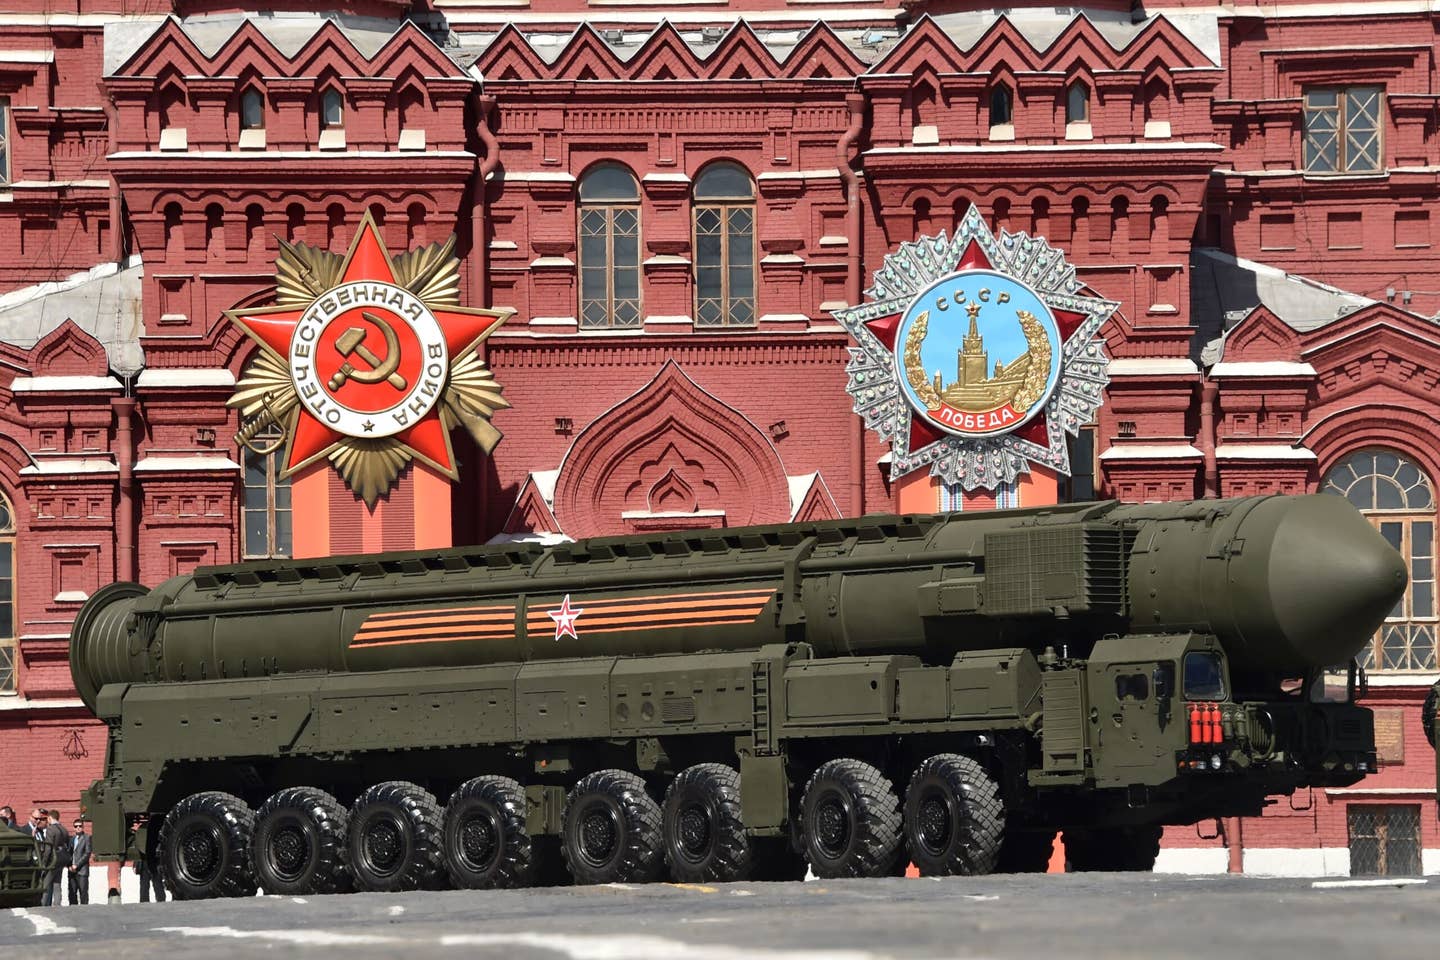 A Russian RS-24 Yars intercontinental ballistic missile system drives through Red Square in Moscow, on May 7, 2015, during a rehearsal for the Victory Day military parade. <em>Photo by KIRILL KUDRYAVTSEV/AFP via Getty Images</em>